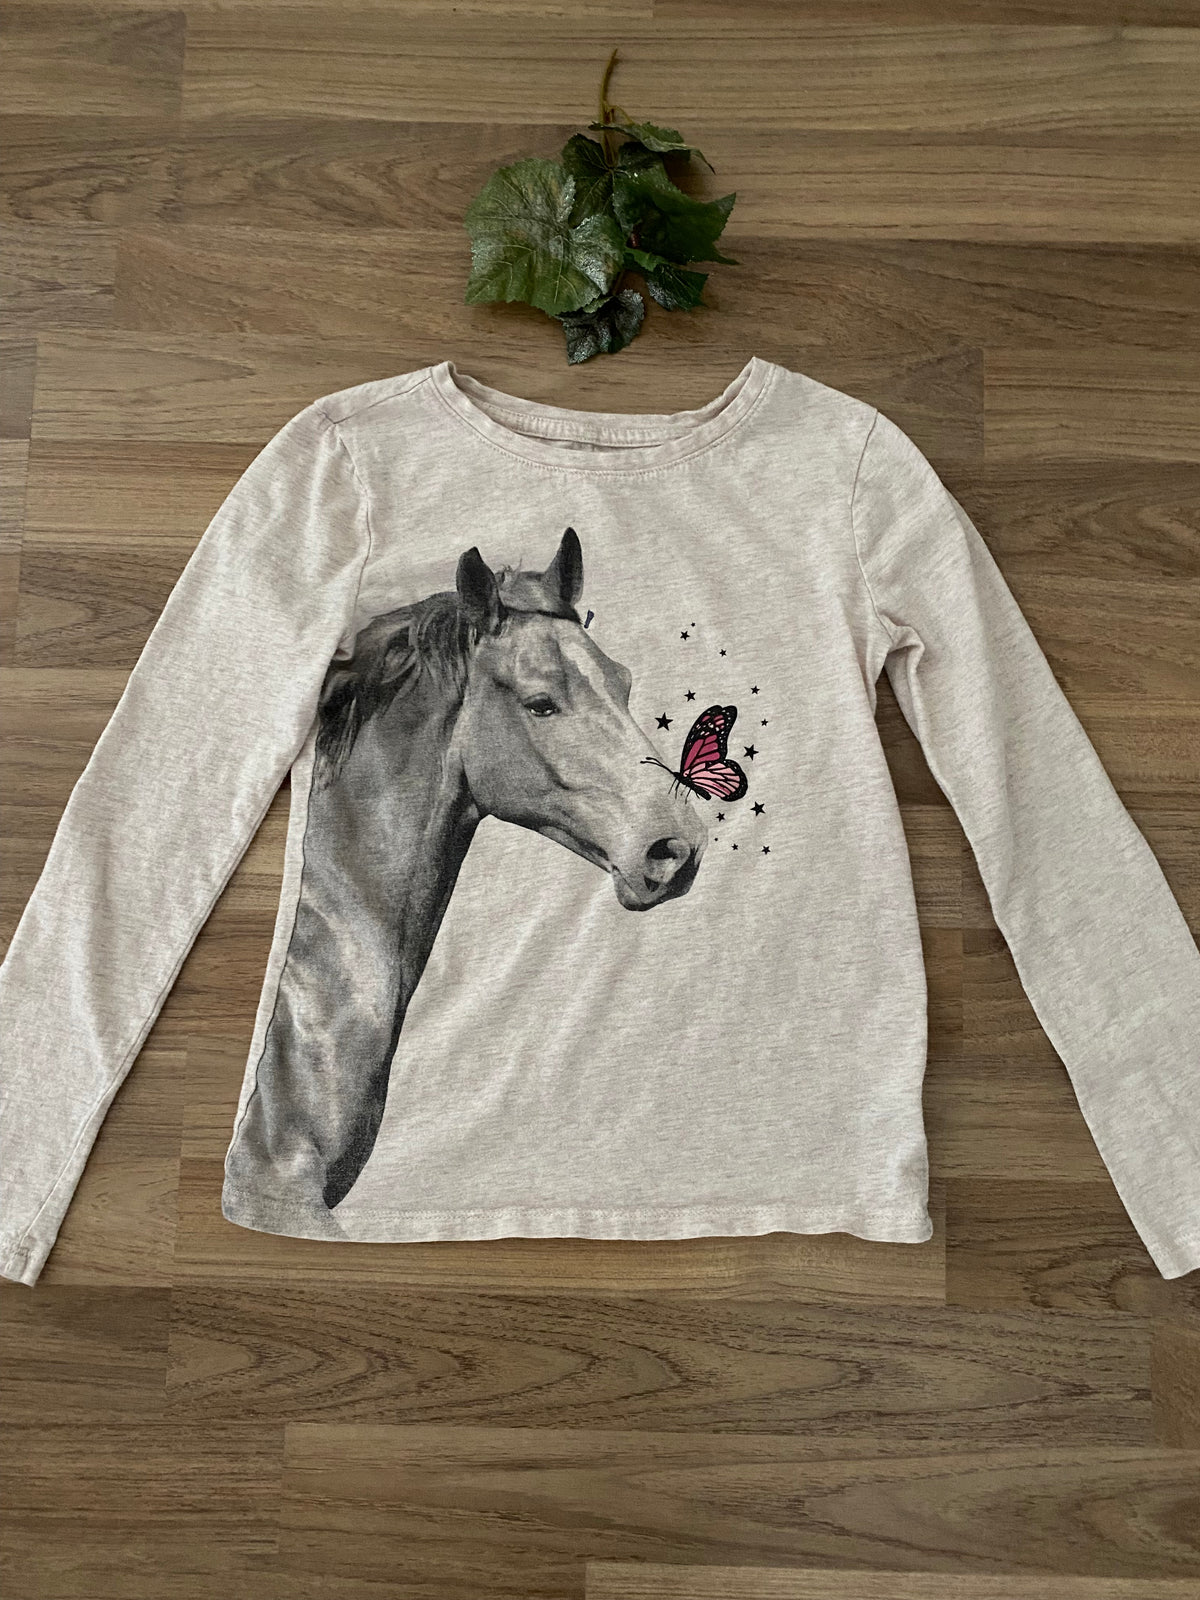 Long Sleeve Graphic Top (Girls Size 8-9)